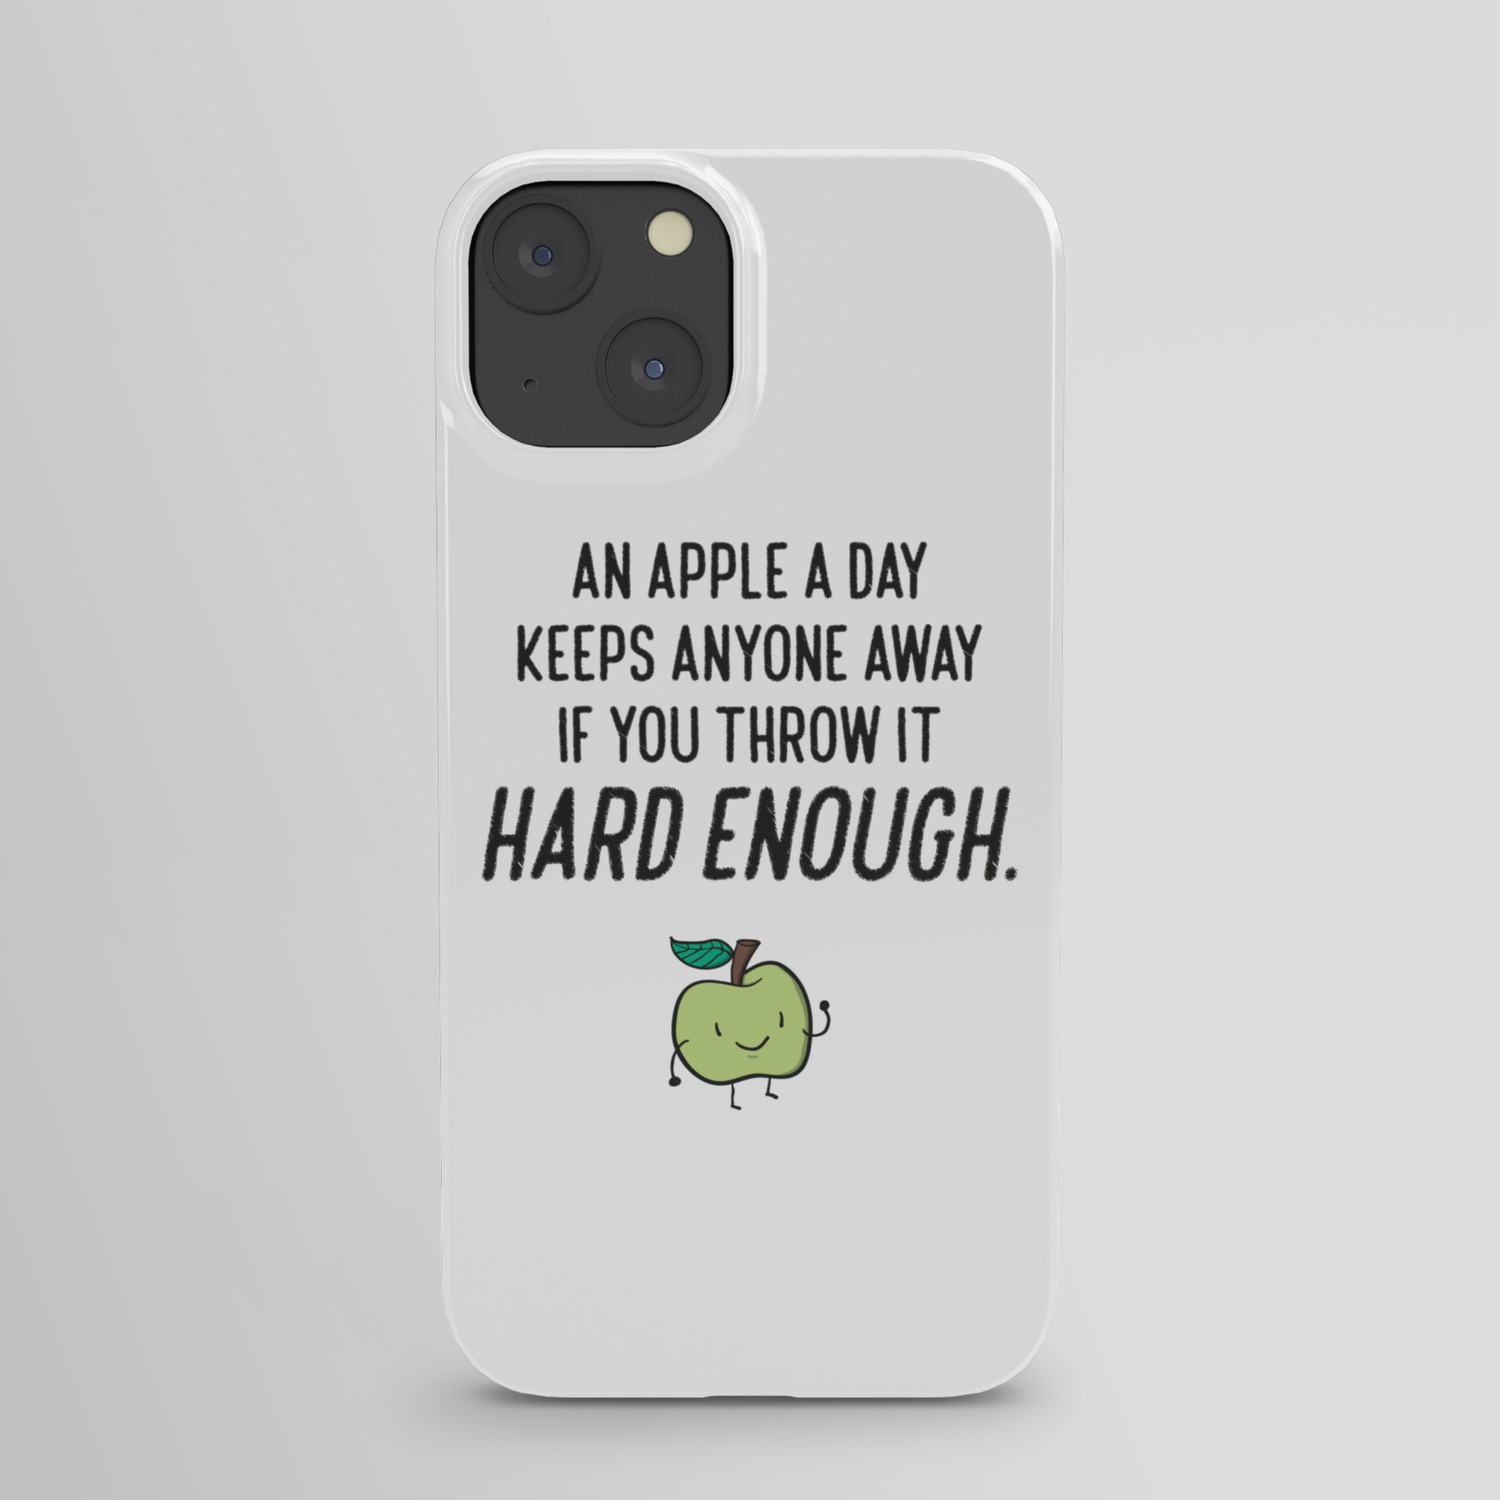 Funny Apple Sarcasm Humor Quotes iPhone Case by kick-ass-art | Society6